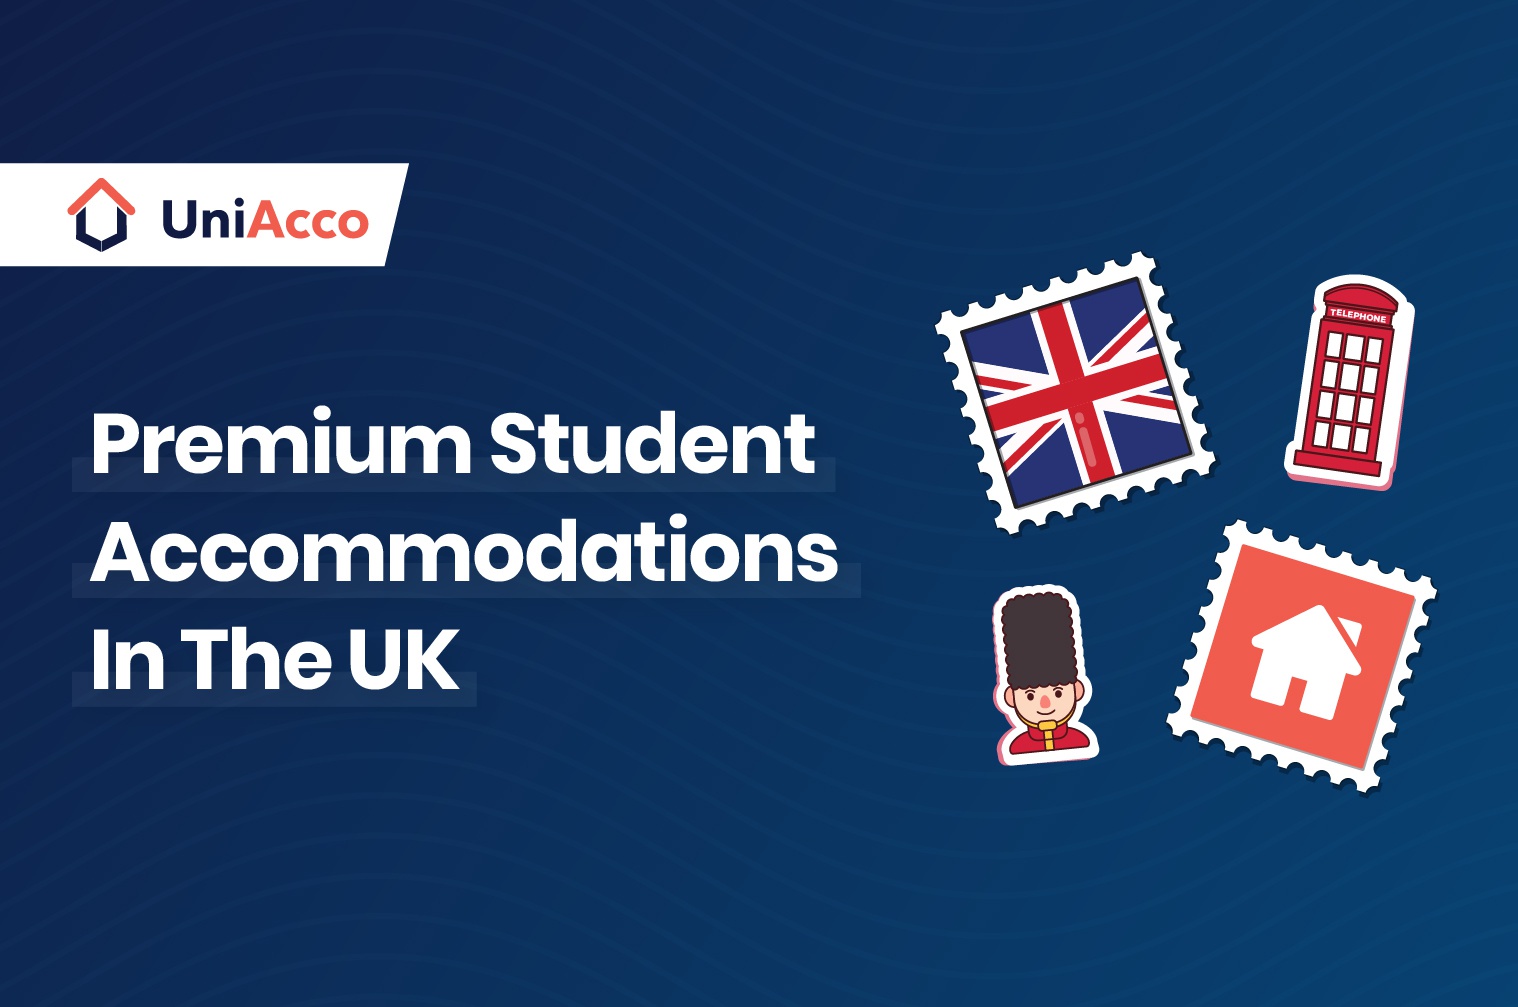 Get Cheap & Premium Student Accommodations In The UK With UniAcco